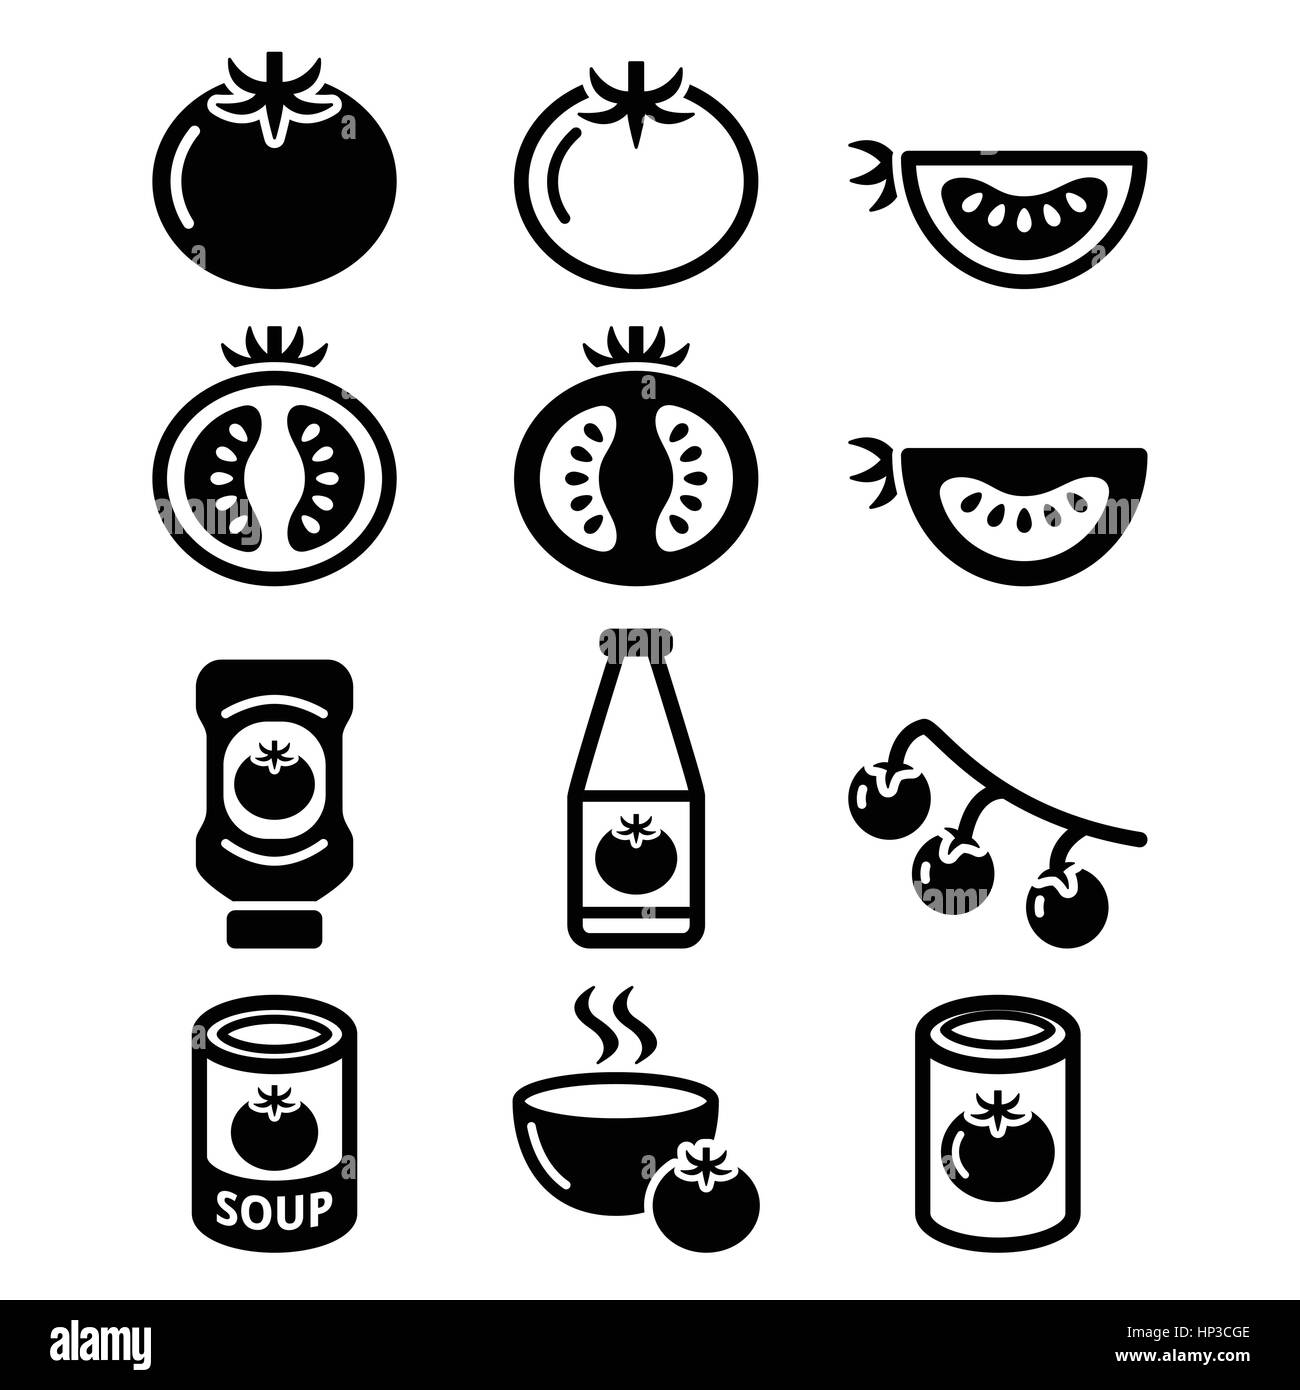 Tomate, ketchup, soupe de tomate icons set. Vector icons set alimentaires tomates isolated on white Illustration de Vecteur